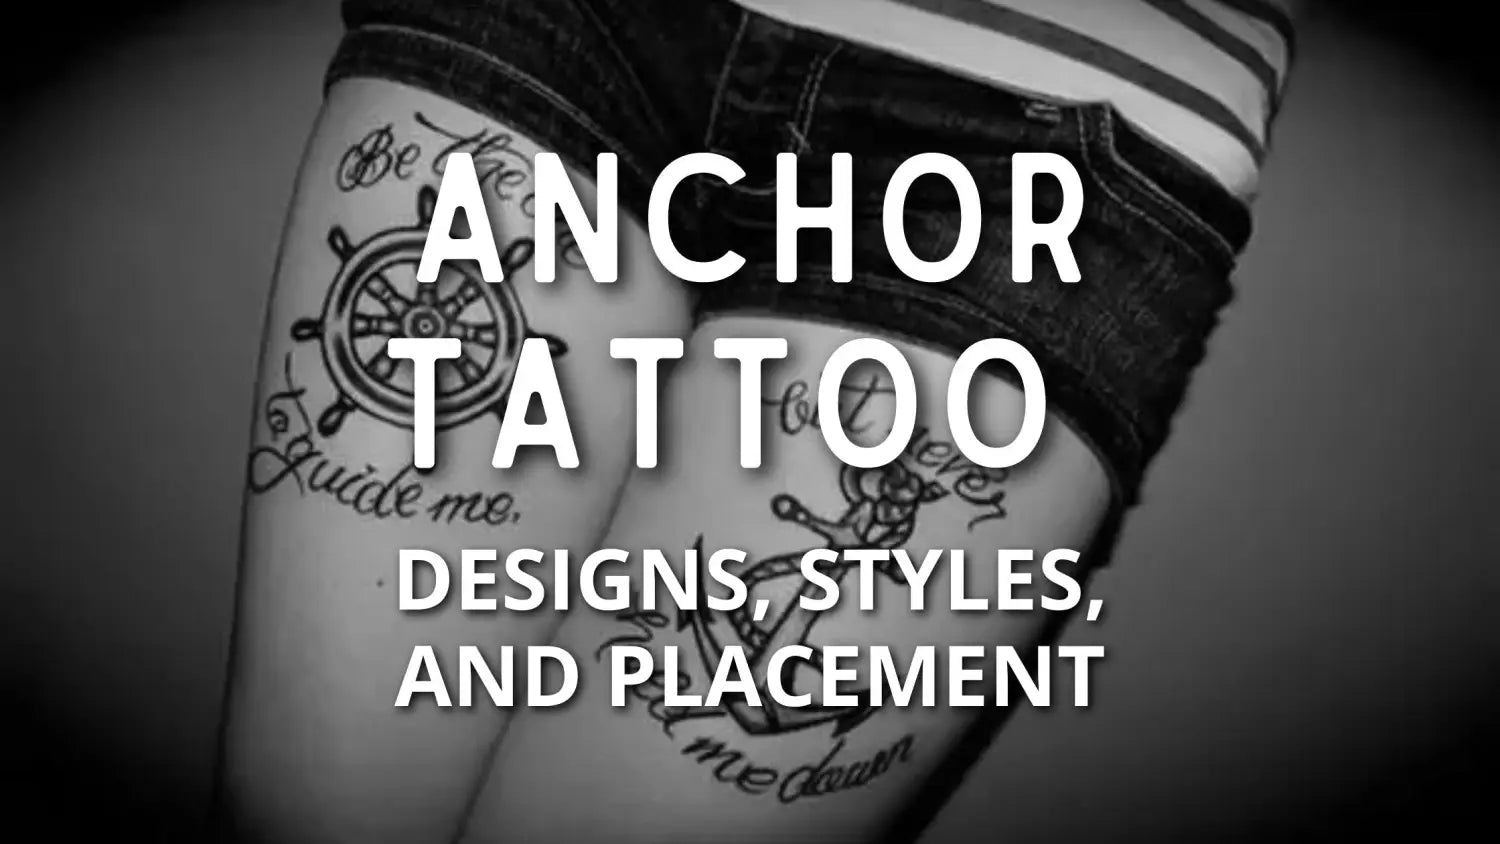 Anchor Tattoos: Designs, Styles, and Placement